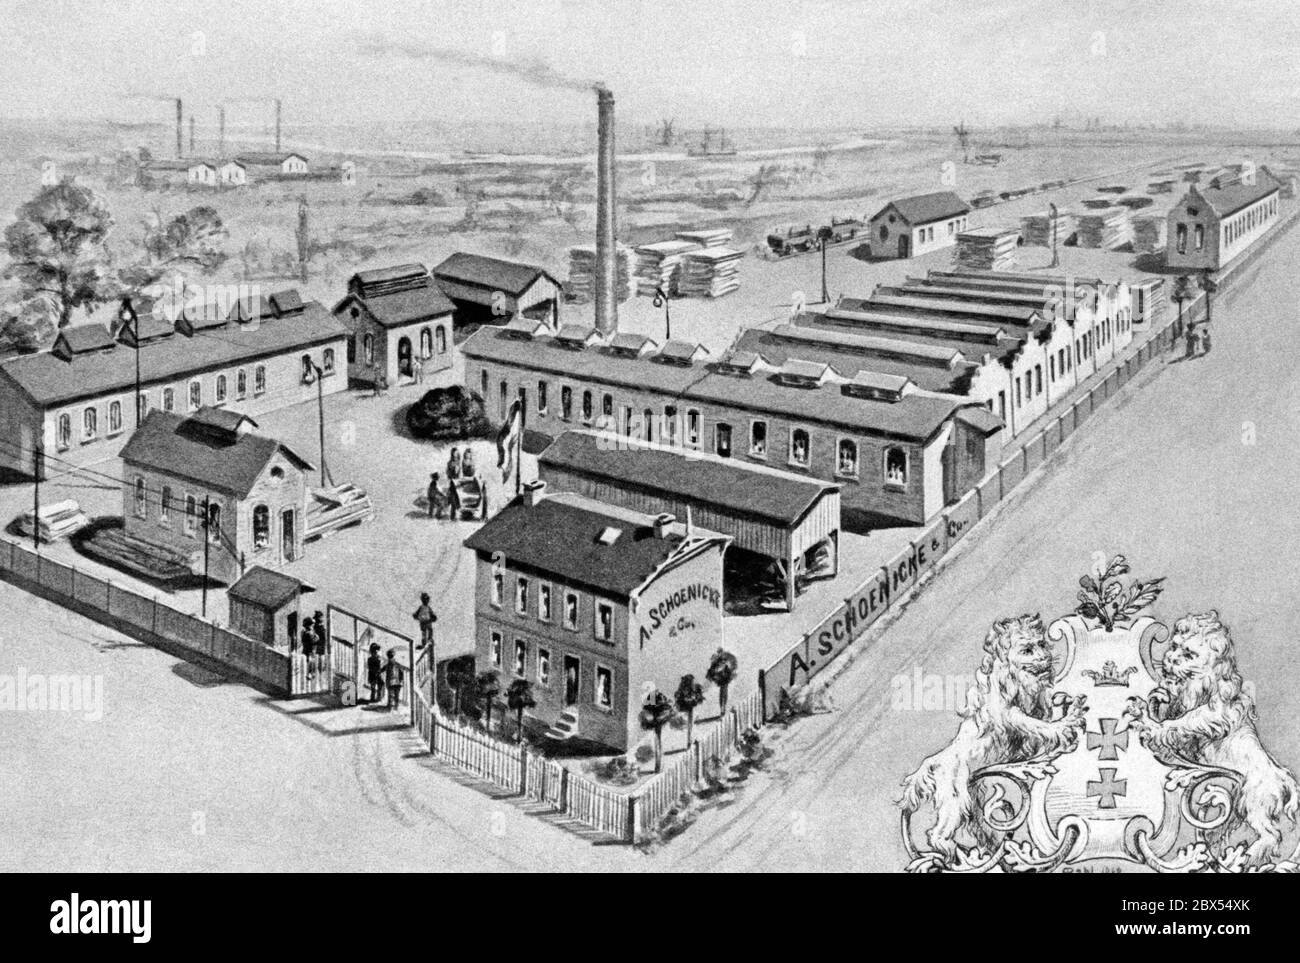 A drawing of the factory of the company Danziger Parkett- und Holzindustrie A. Schoenicke und Co. from the year 1800. On the factory premises the wood is piled up for further processing. Stock Photo